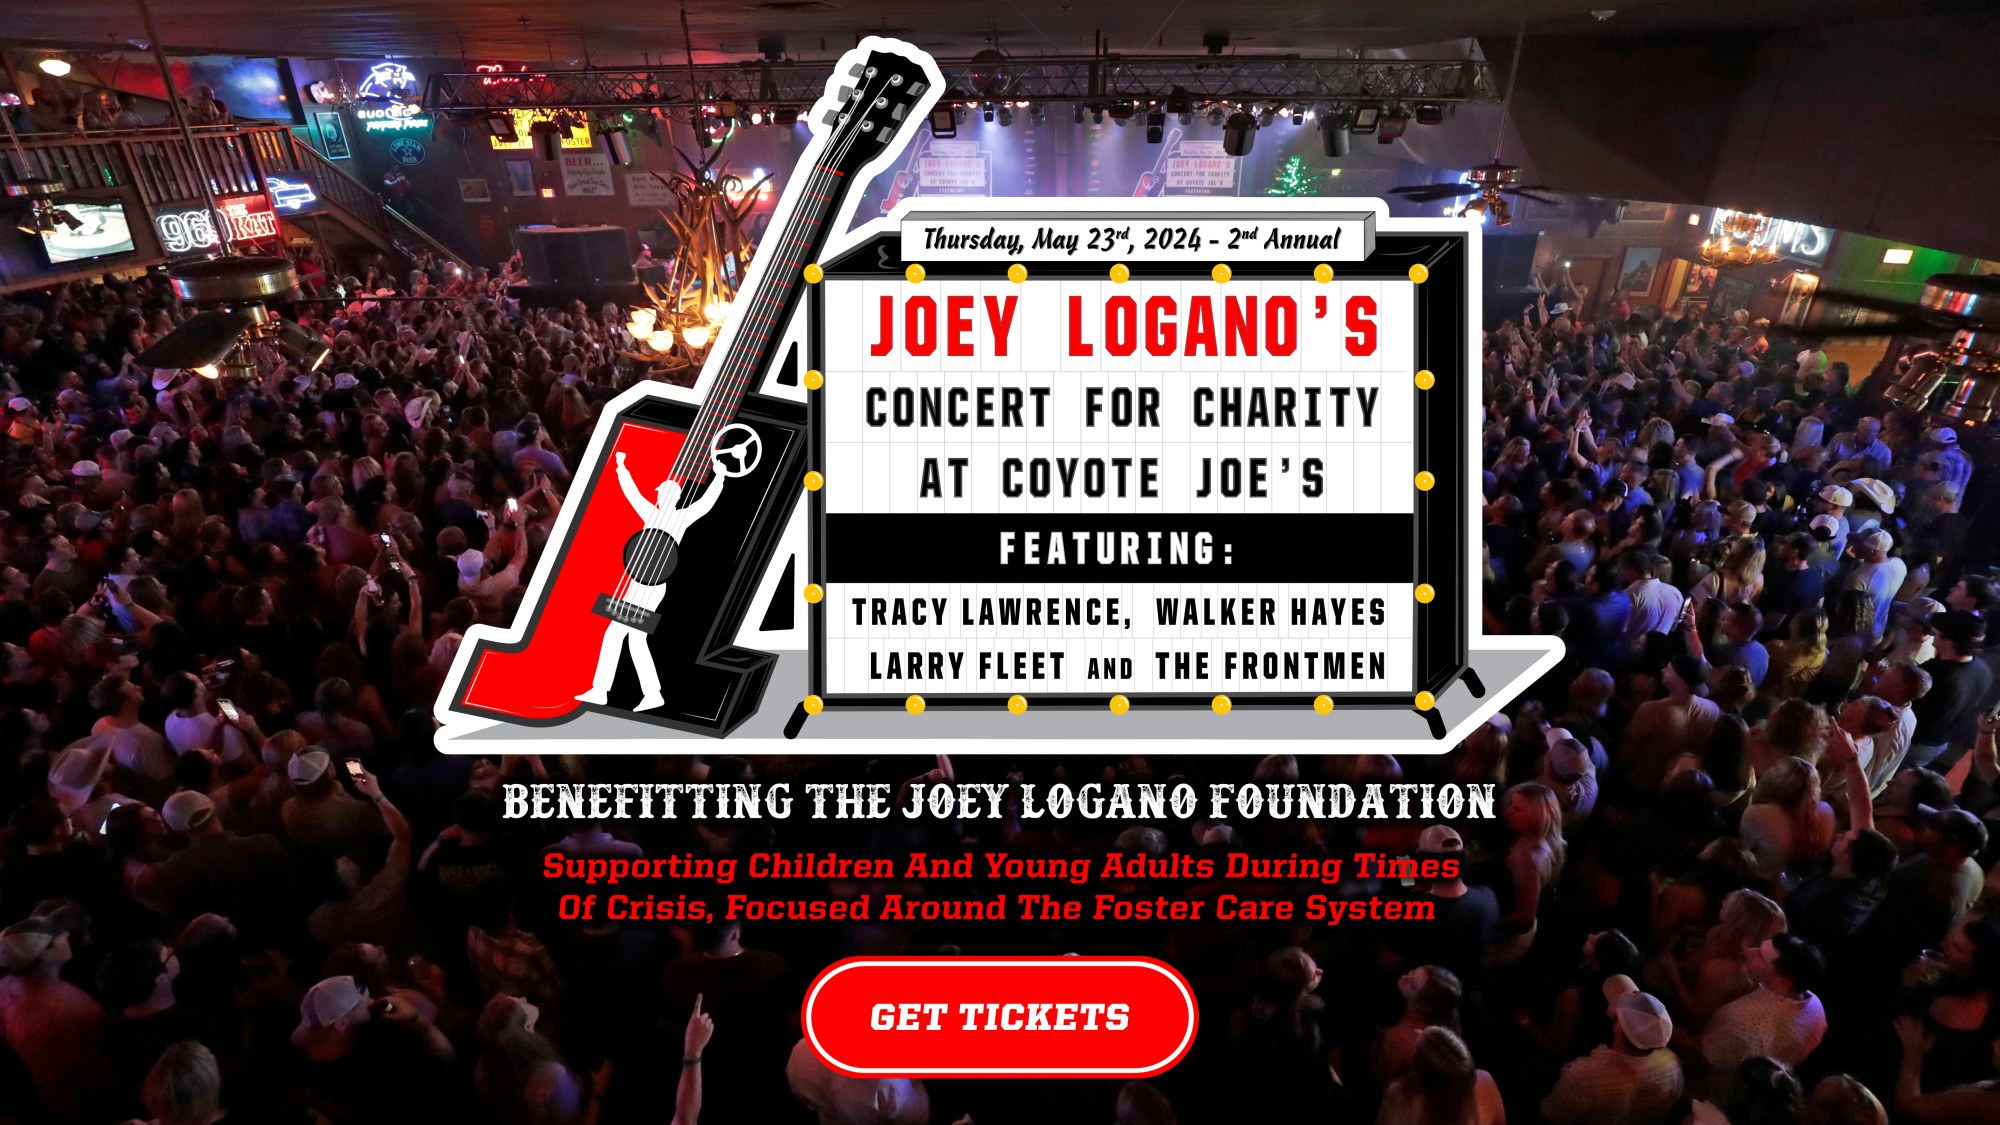 Joey Logano Concert For Charity